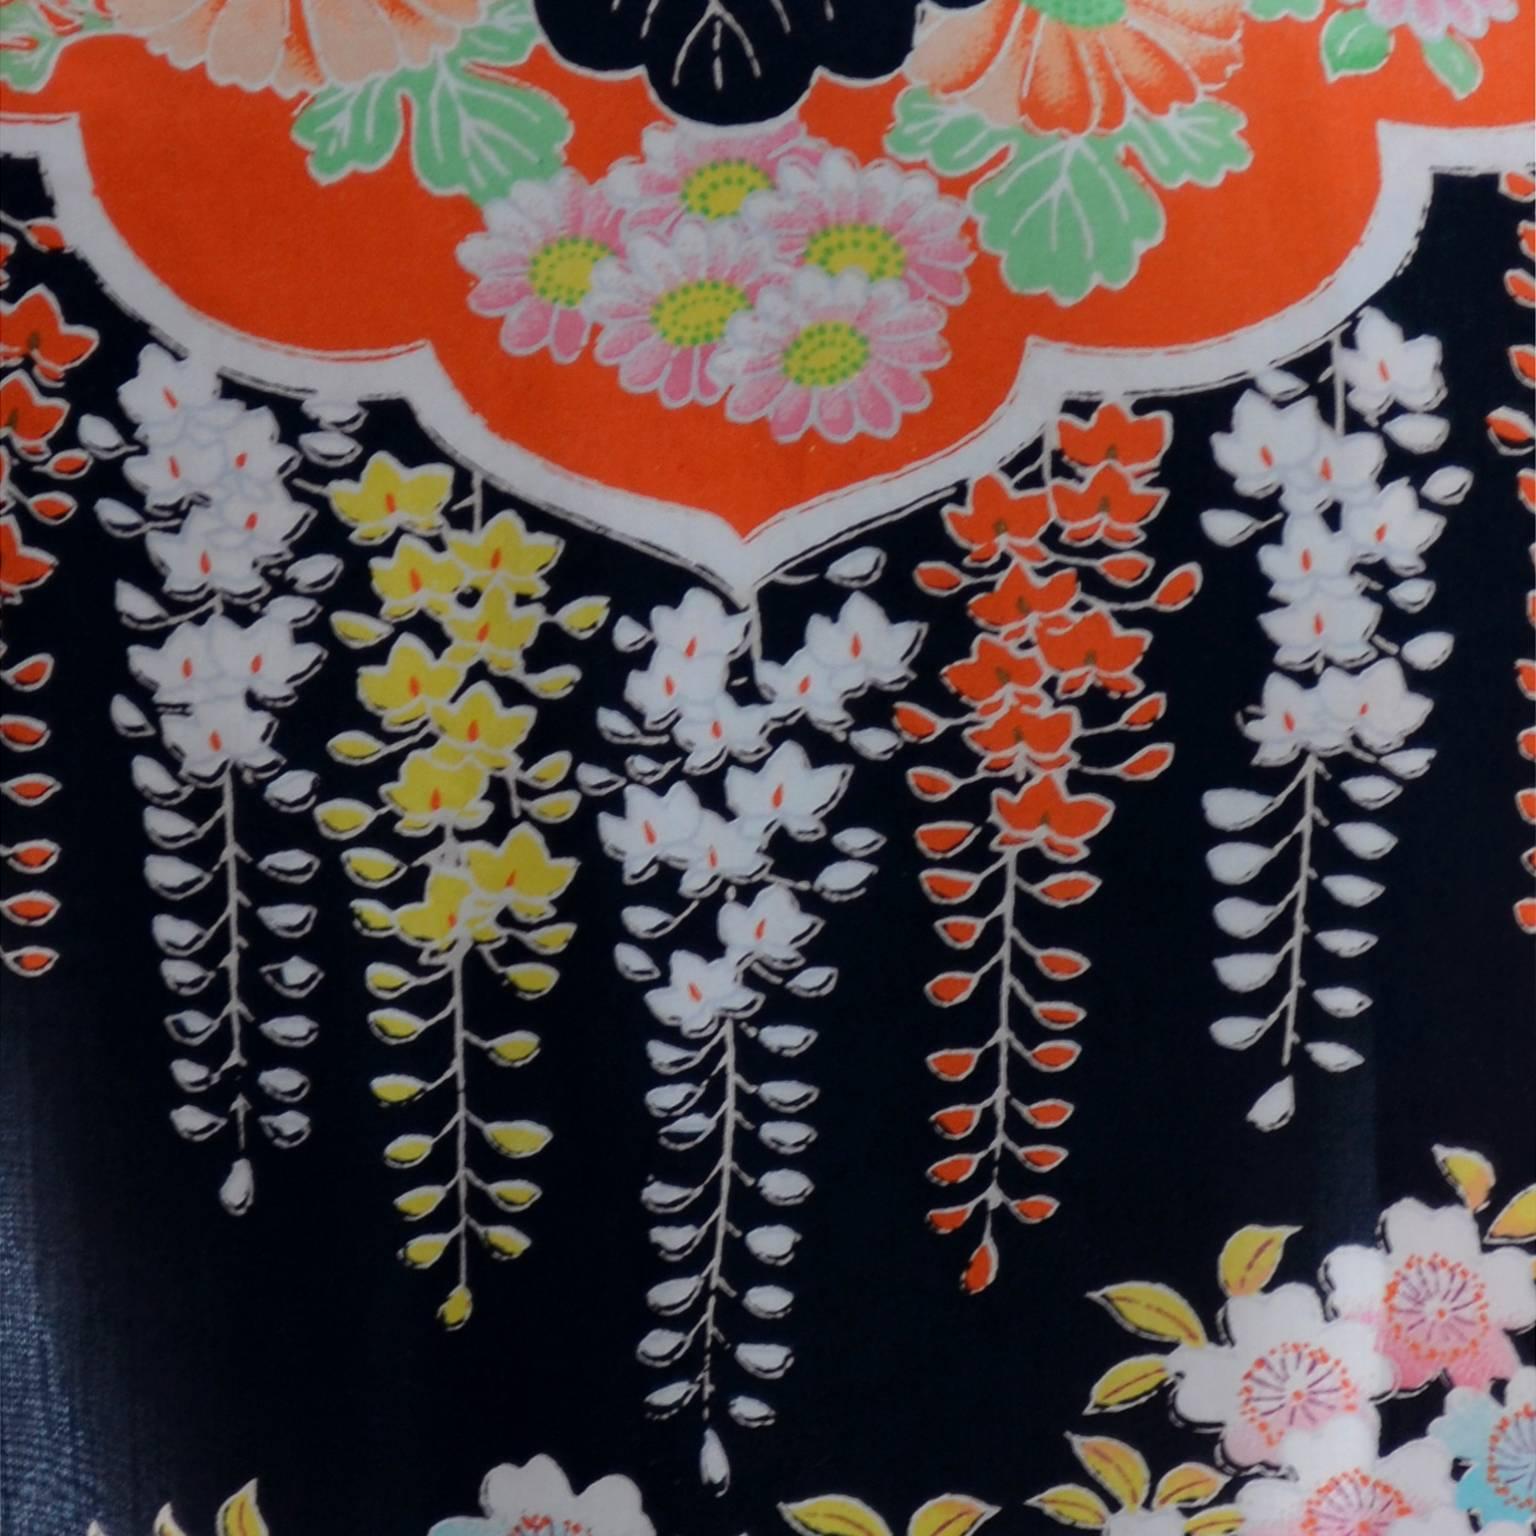 This vintage Japanese silk robe or kimono style jacket is from an estate of Asian antique textiles and fabrics.  The woman who owned this had an incredible collection and I was fortunate to be able to handle the clothing items.  This piece is dark